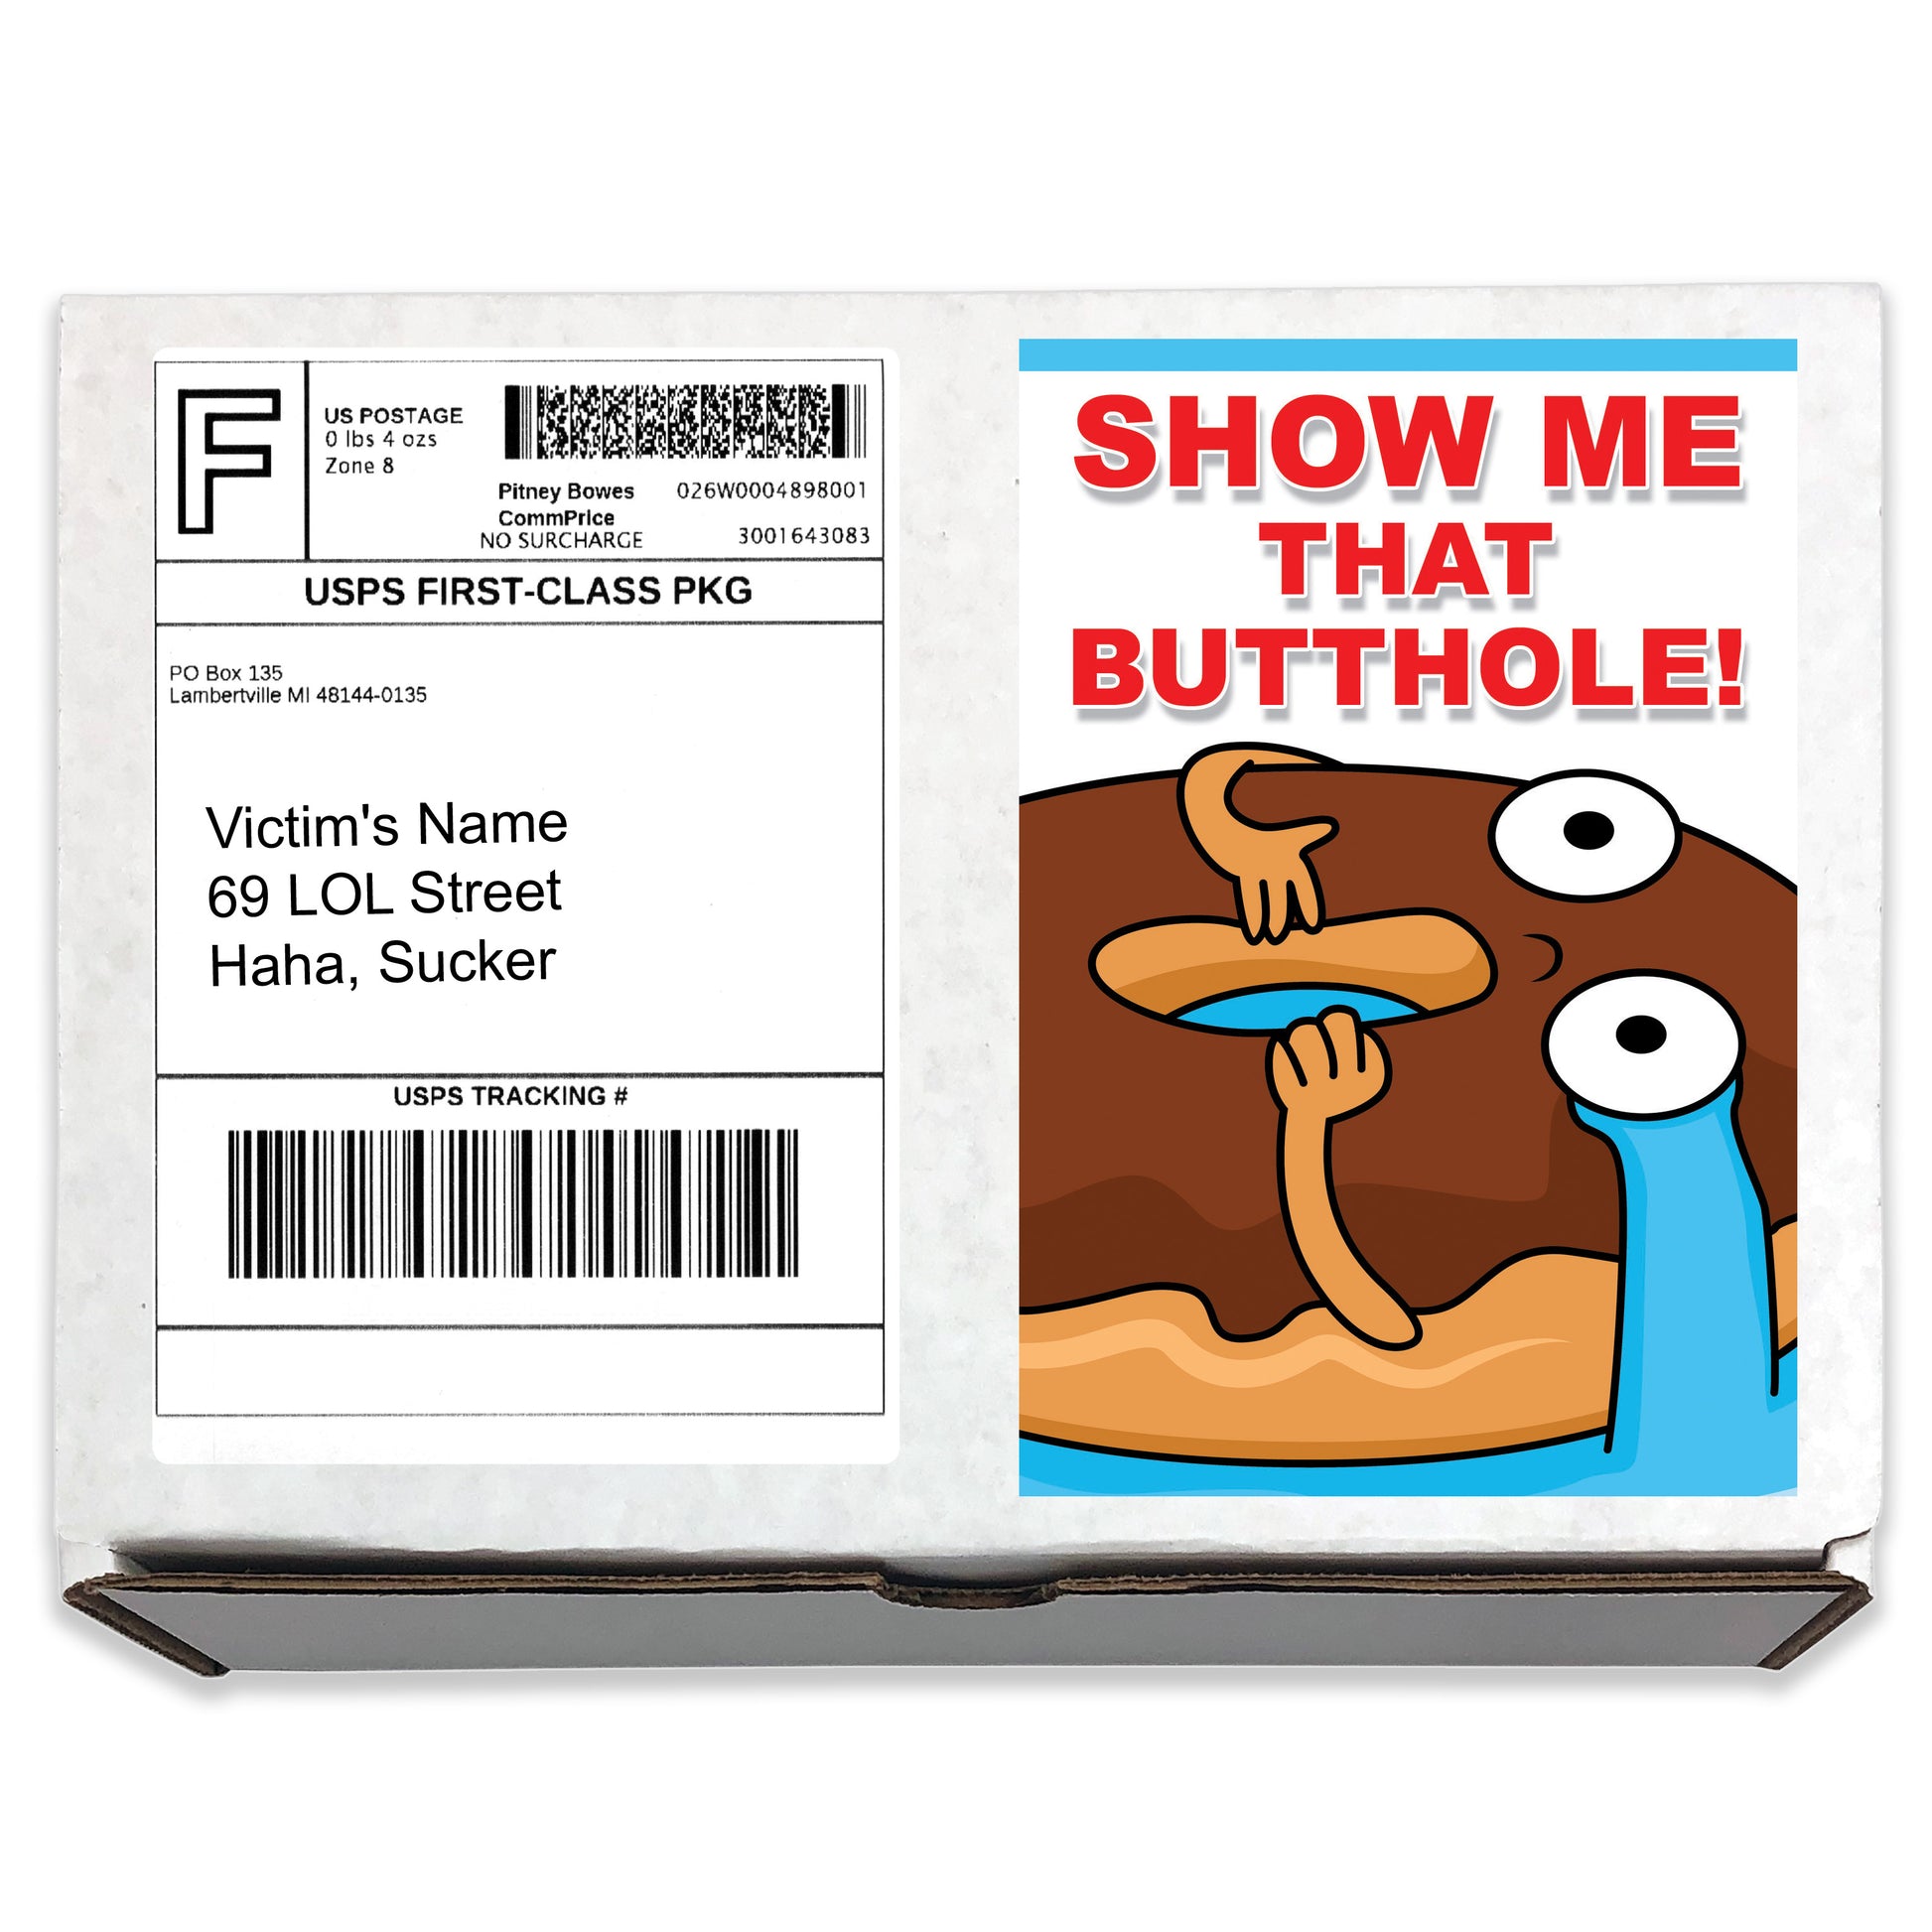 Show Me That Butthole Prank Mail Gag